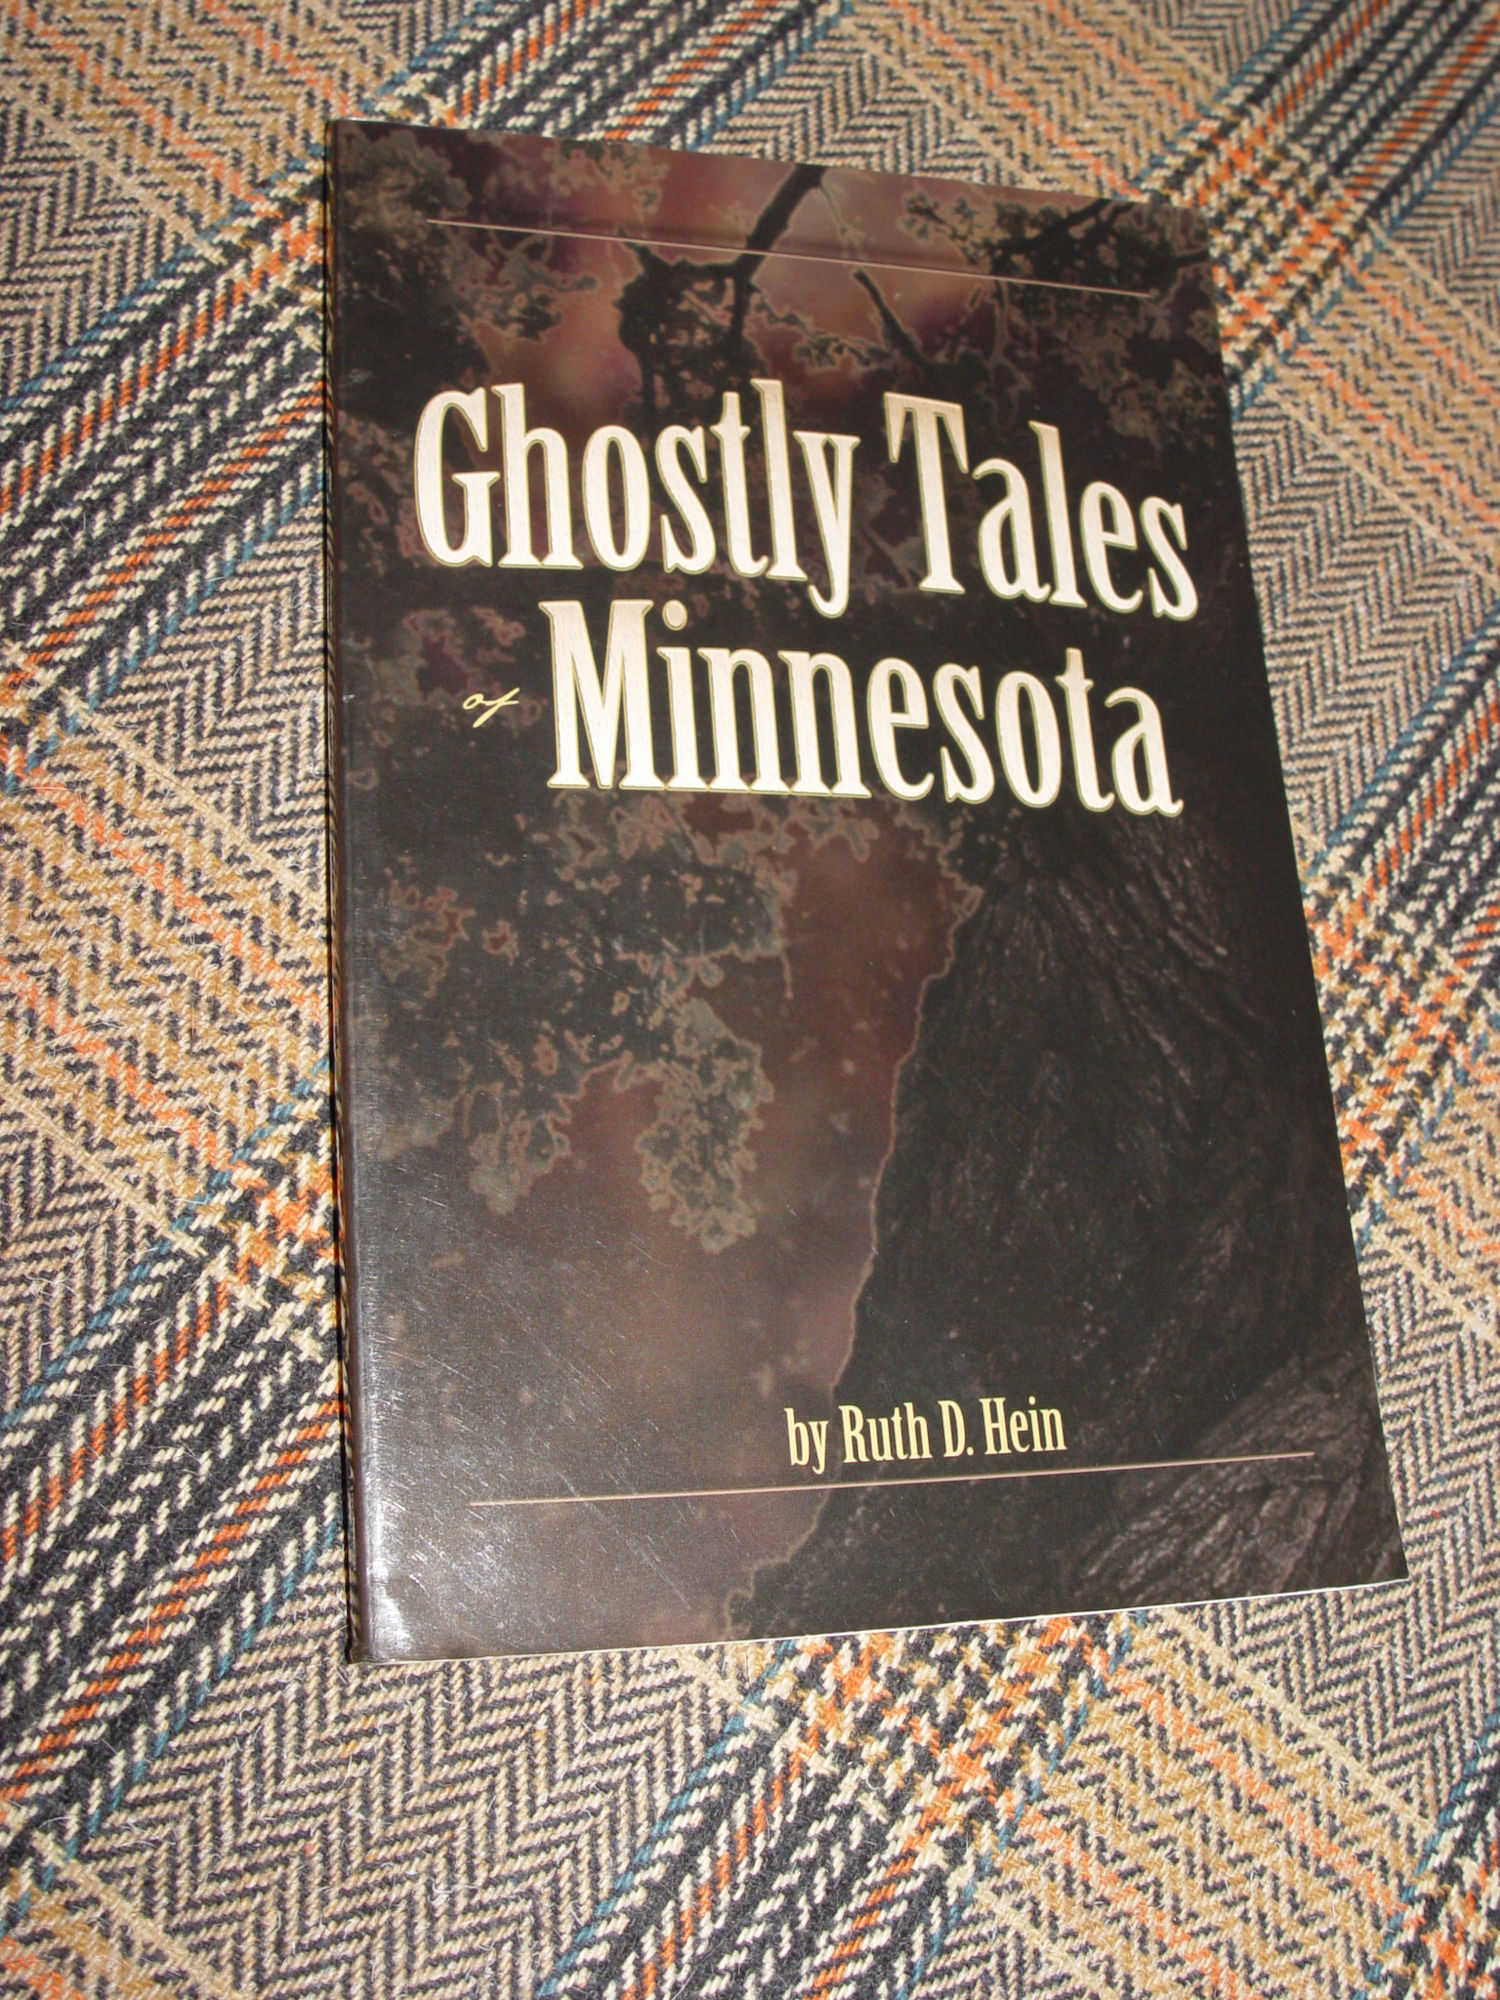 Ghostly Tales of Minnesota 1992 by Ruth D.
                        Hein